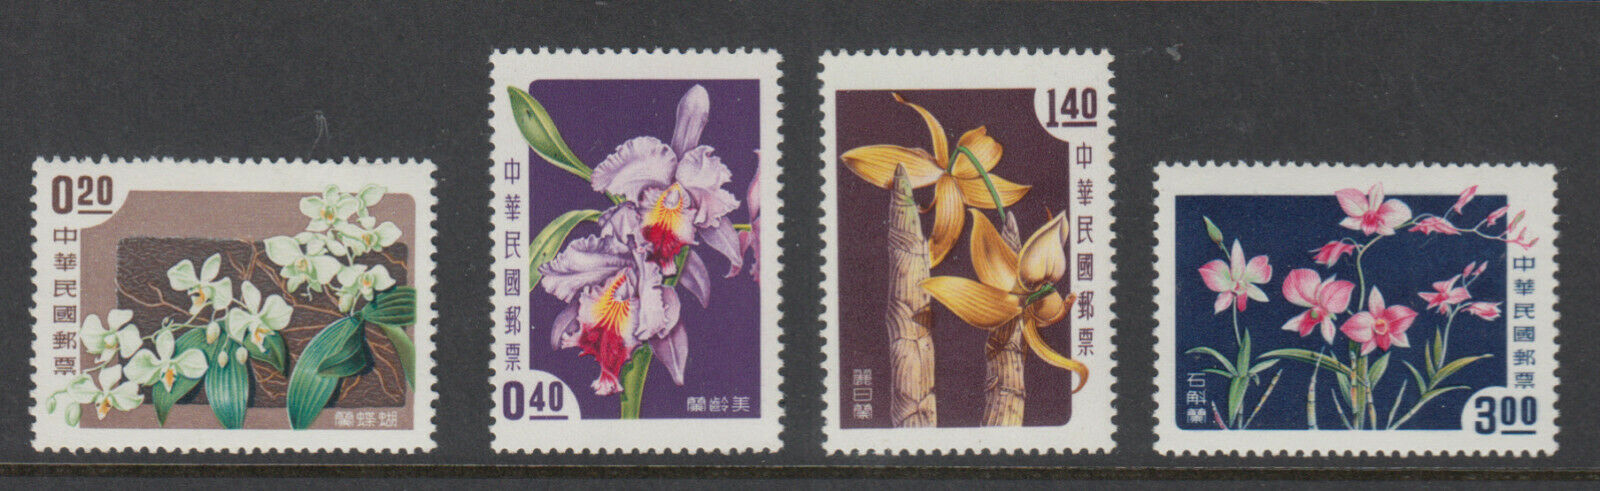 Taiwan Roc Sc 1189 - 1192 Orchids Set Mint Never Hinged